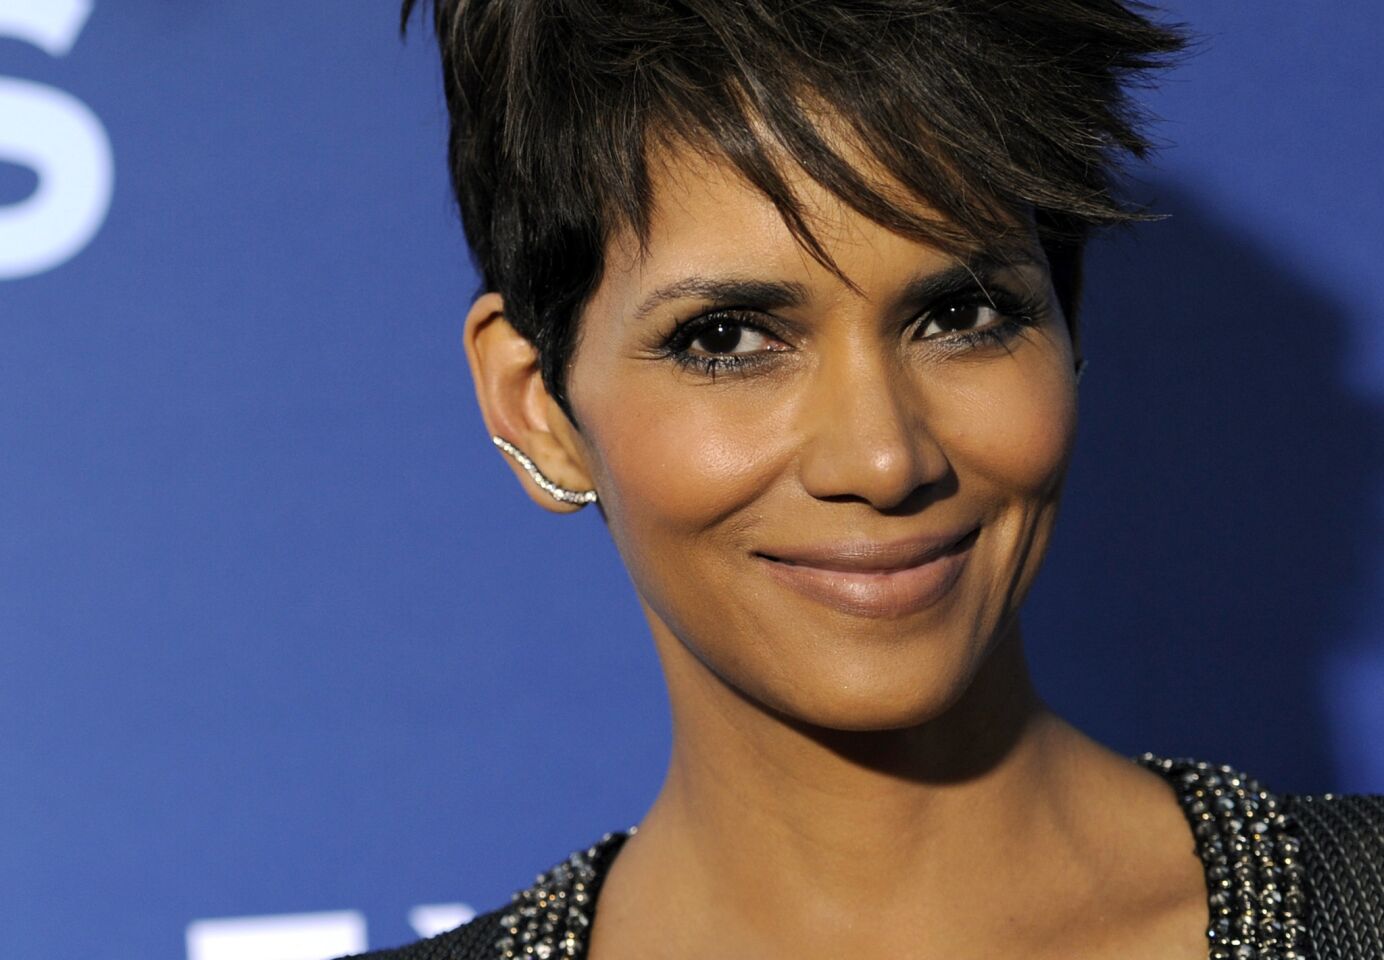 In 2011, Richard Anthony Franco was accused of stalking Halle Berry at her home. "All of a sudden I sensed someone behind me and turned to see the same intruder standing less than a foot behind me, staring at me through the glass kitchen door," Berry said in a court filing.